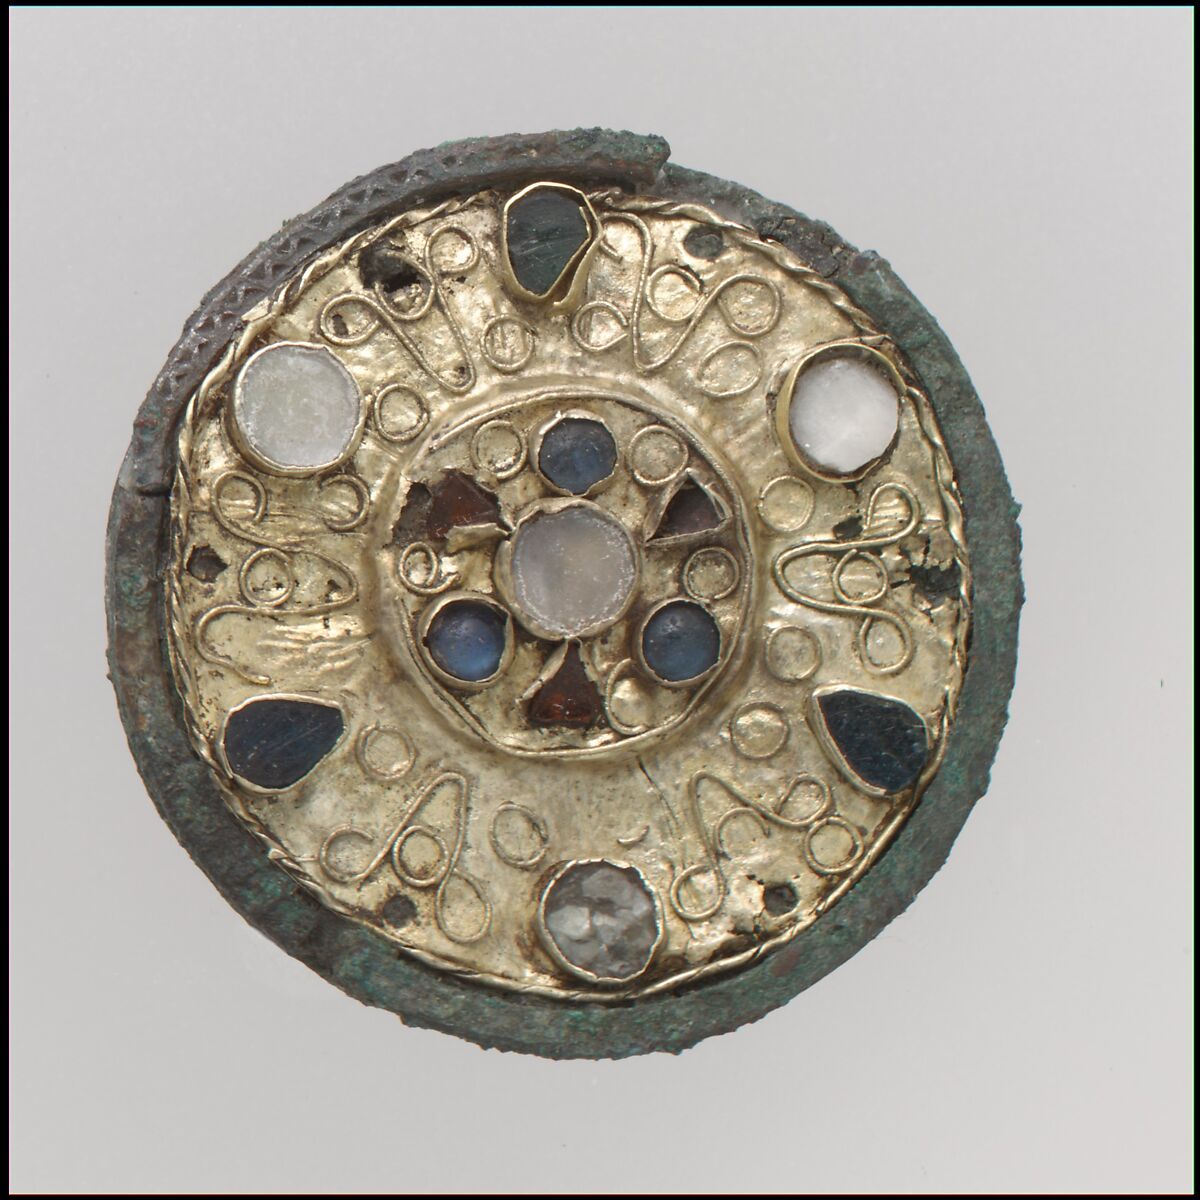 Disk Brooch, Gold, blue and green glass, garnet, mother-of-pearl; silver back, Frankish 